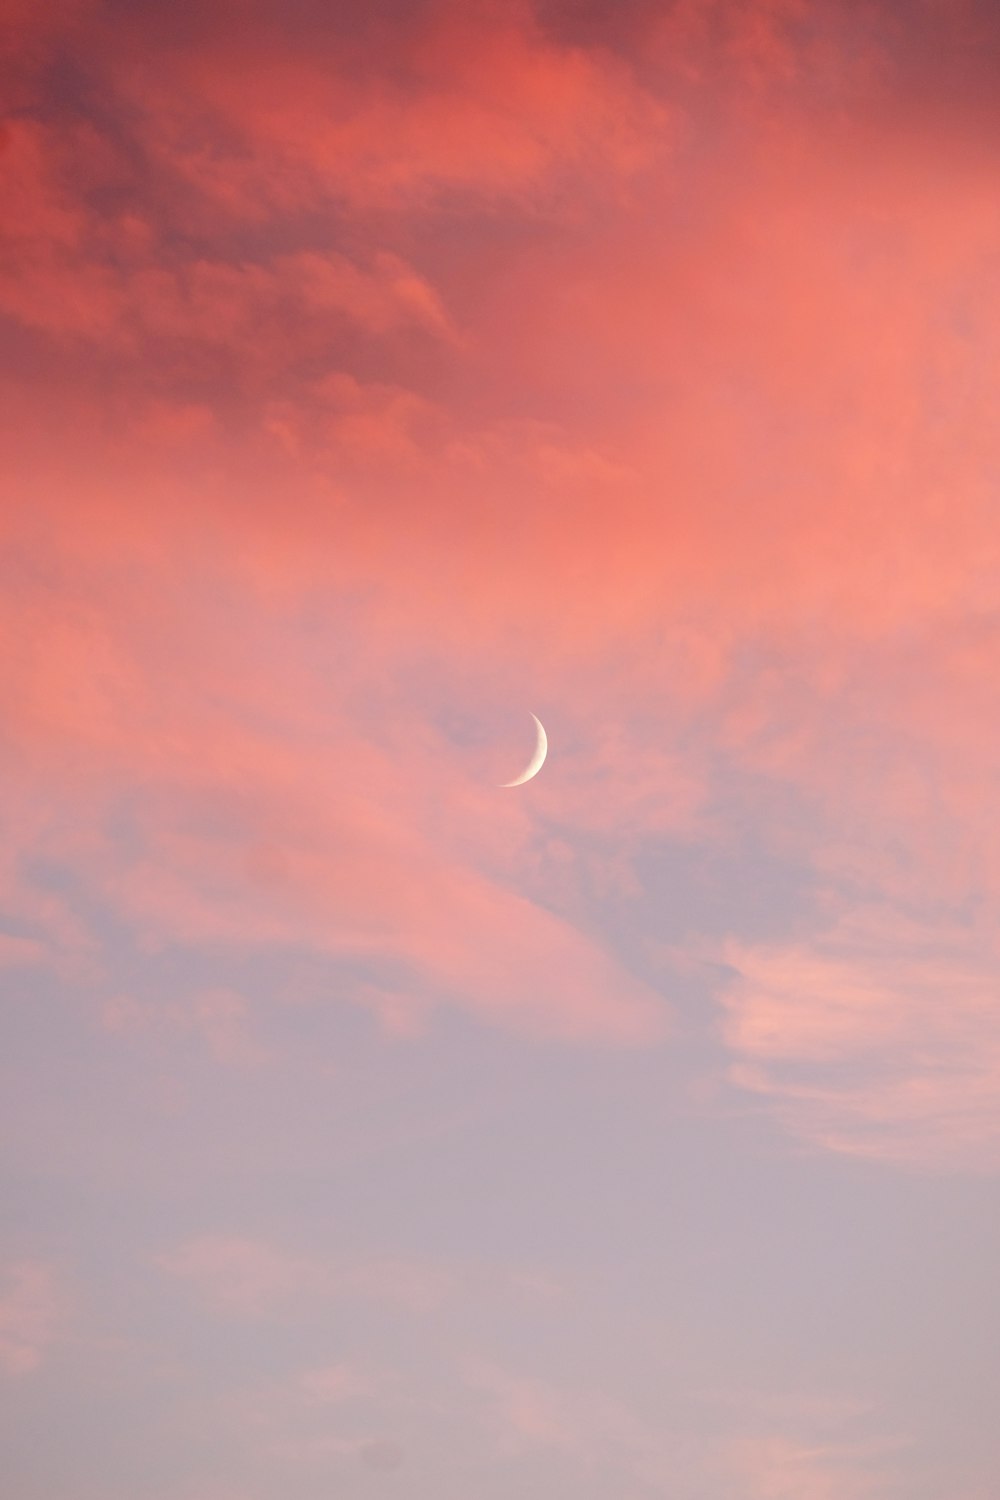 a pink and blue sky with a crescent moon in the middle